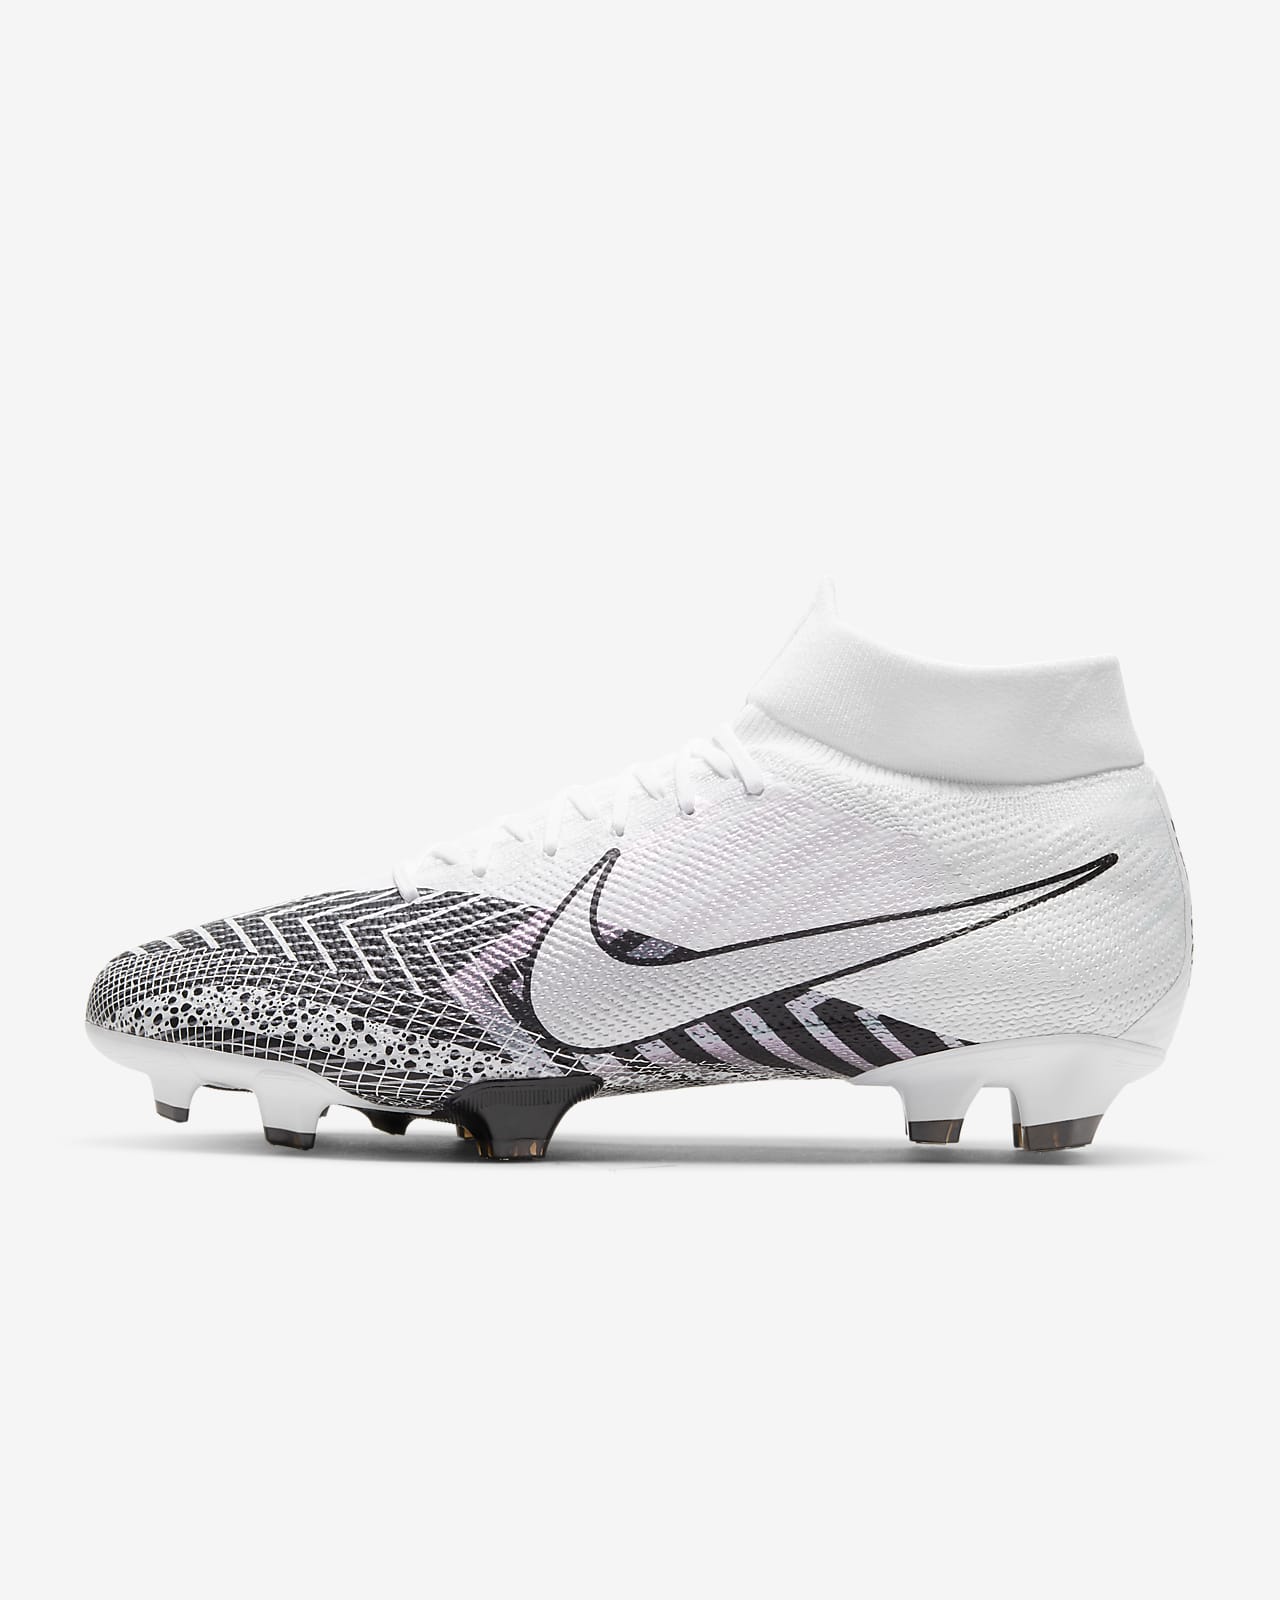 nike mercurial superfly fg price Cheap 